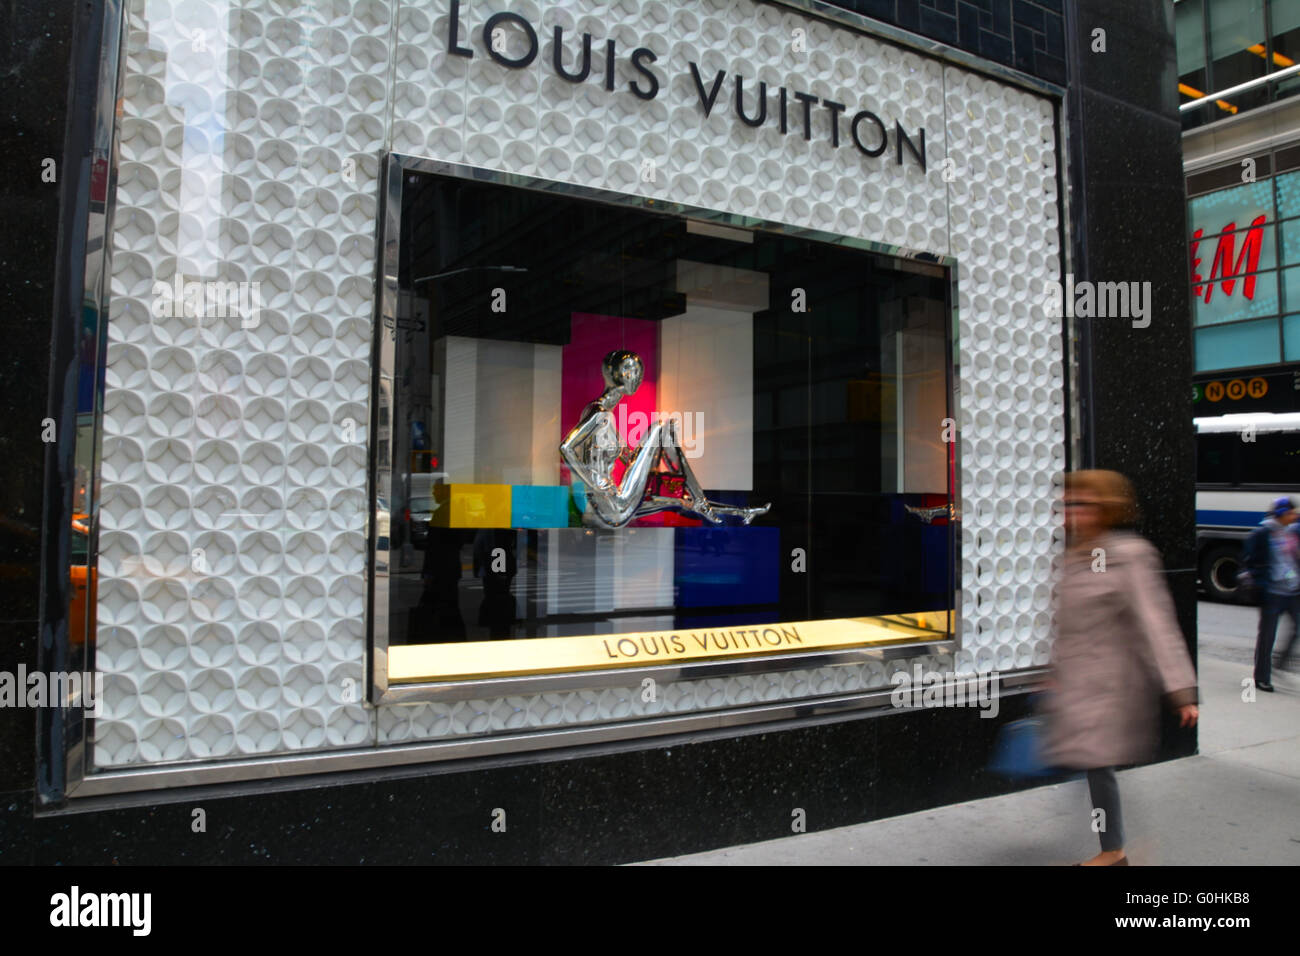 Louis Vuitton window display at Bloomingdale's. NYC, USA Stock